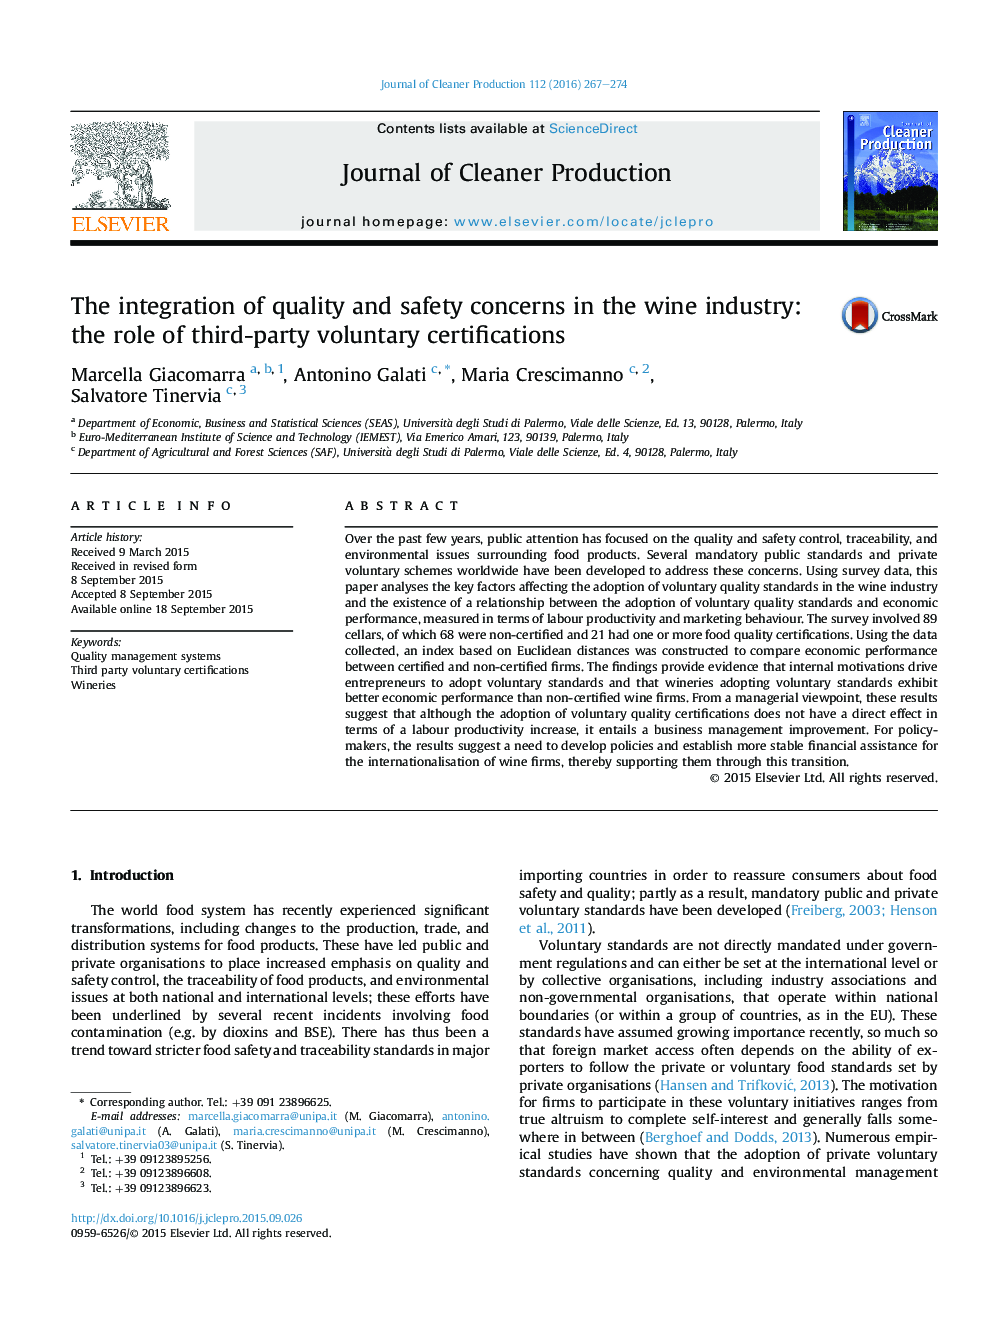 The integration of quality and safety concerns in the wine industry: the role of third-party voluntary certifications